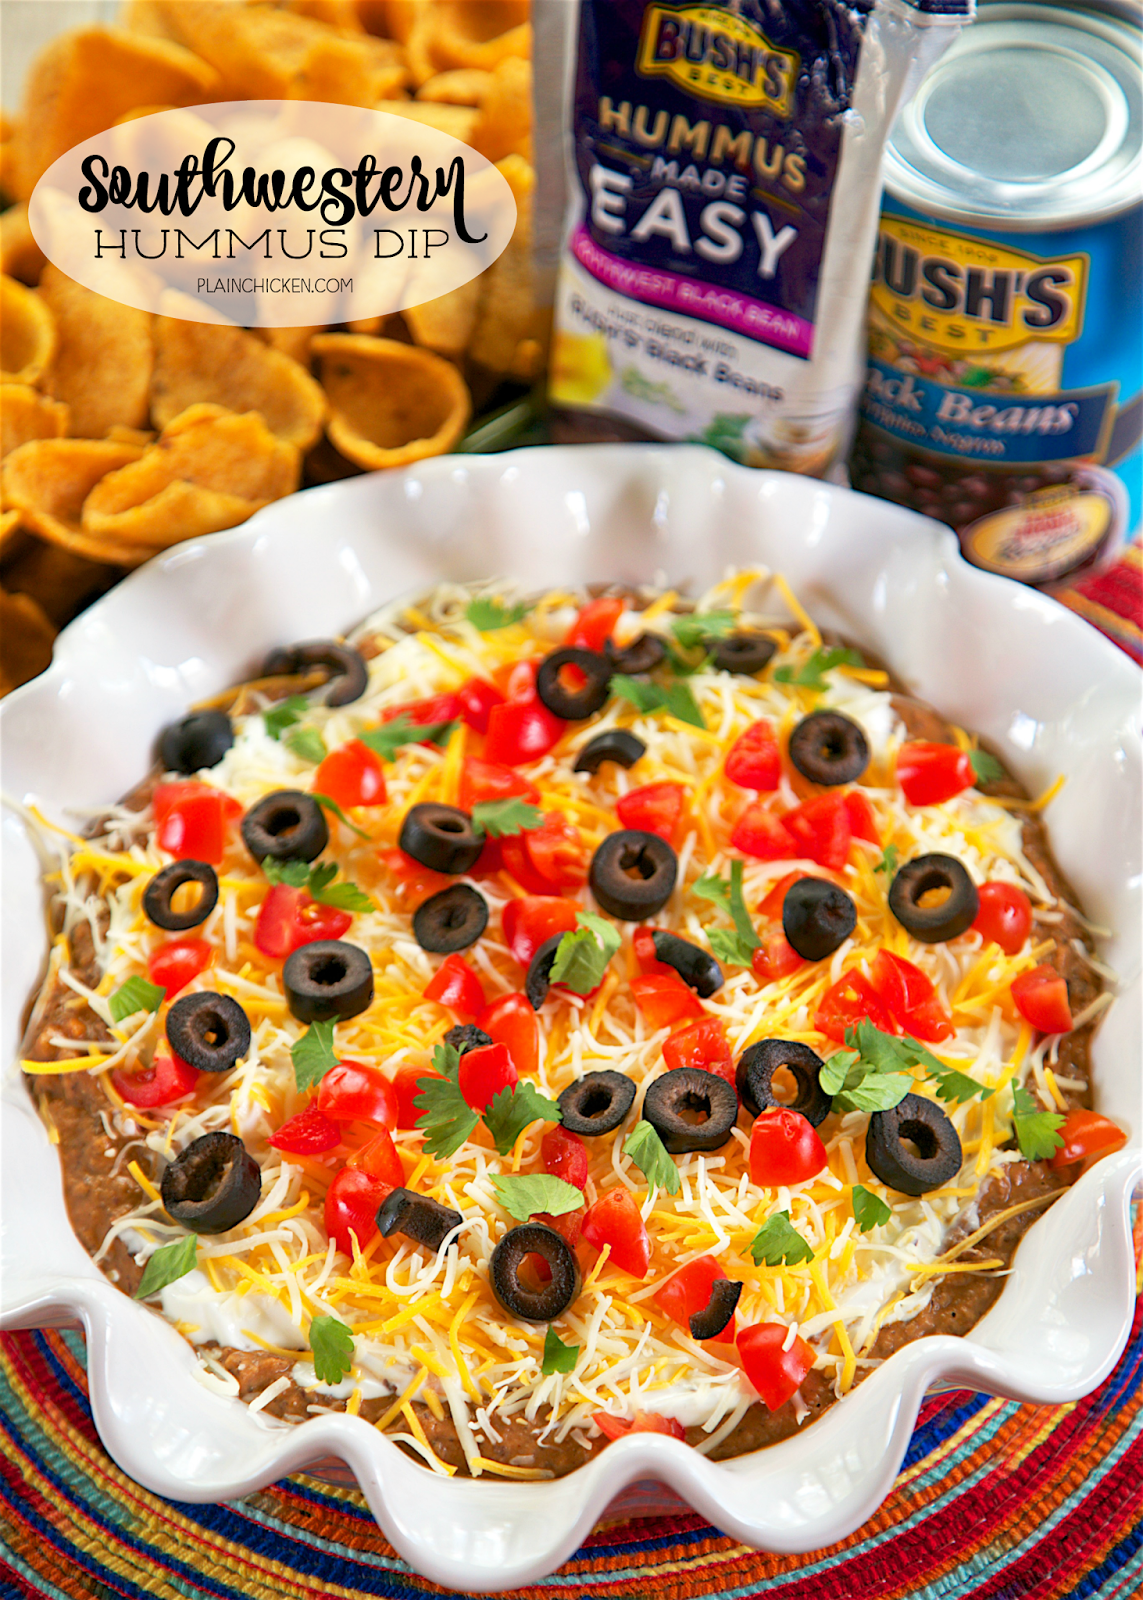 Southwestern Hummus Dip - 2 ingredient homemade black bean hummus topped with sour cream, cheese, tomatoes, olives and cilantro. Add some green chiles to the hummus for a kick! I took this to a party and everyone loved it. Even the hummus, black bean and sour cream haters raved about this simple dip. Ready in 5 minutes!! Can't beat that!